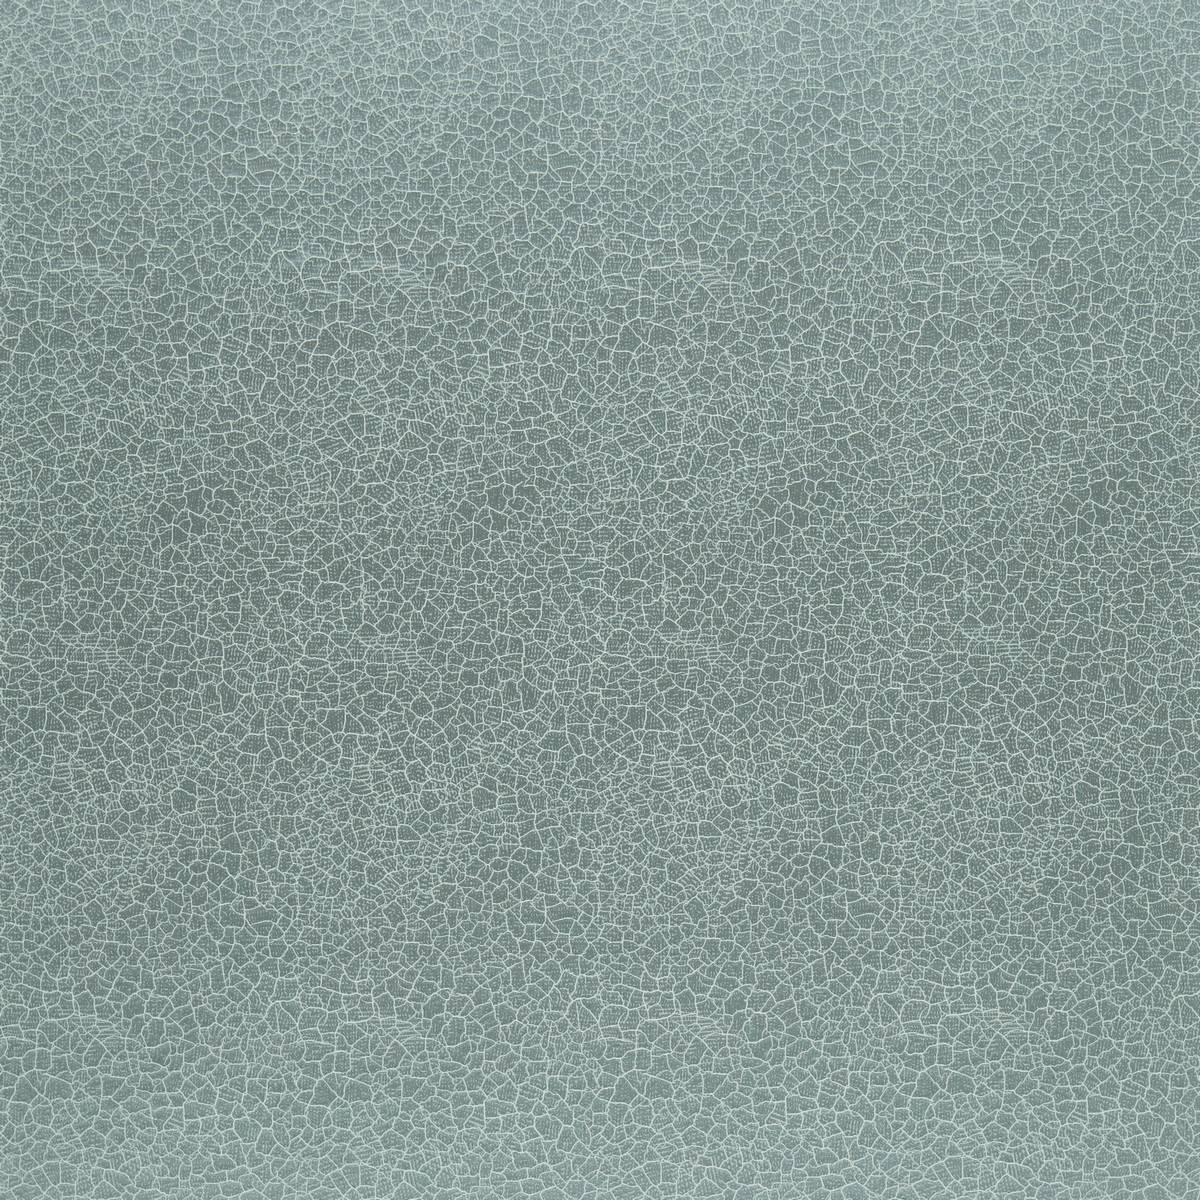 Crackle Pale Teal Fabric by Zoffany